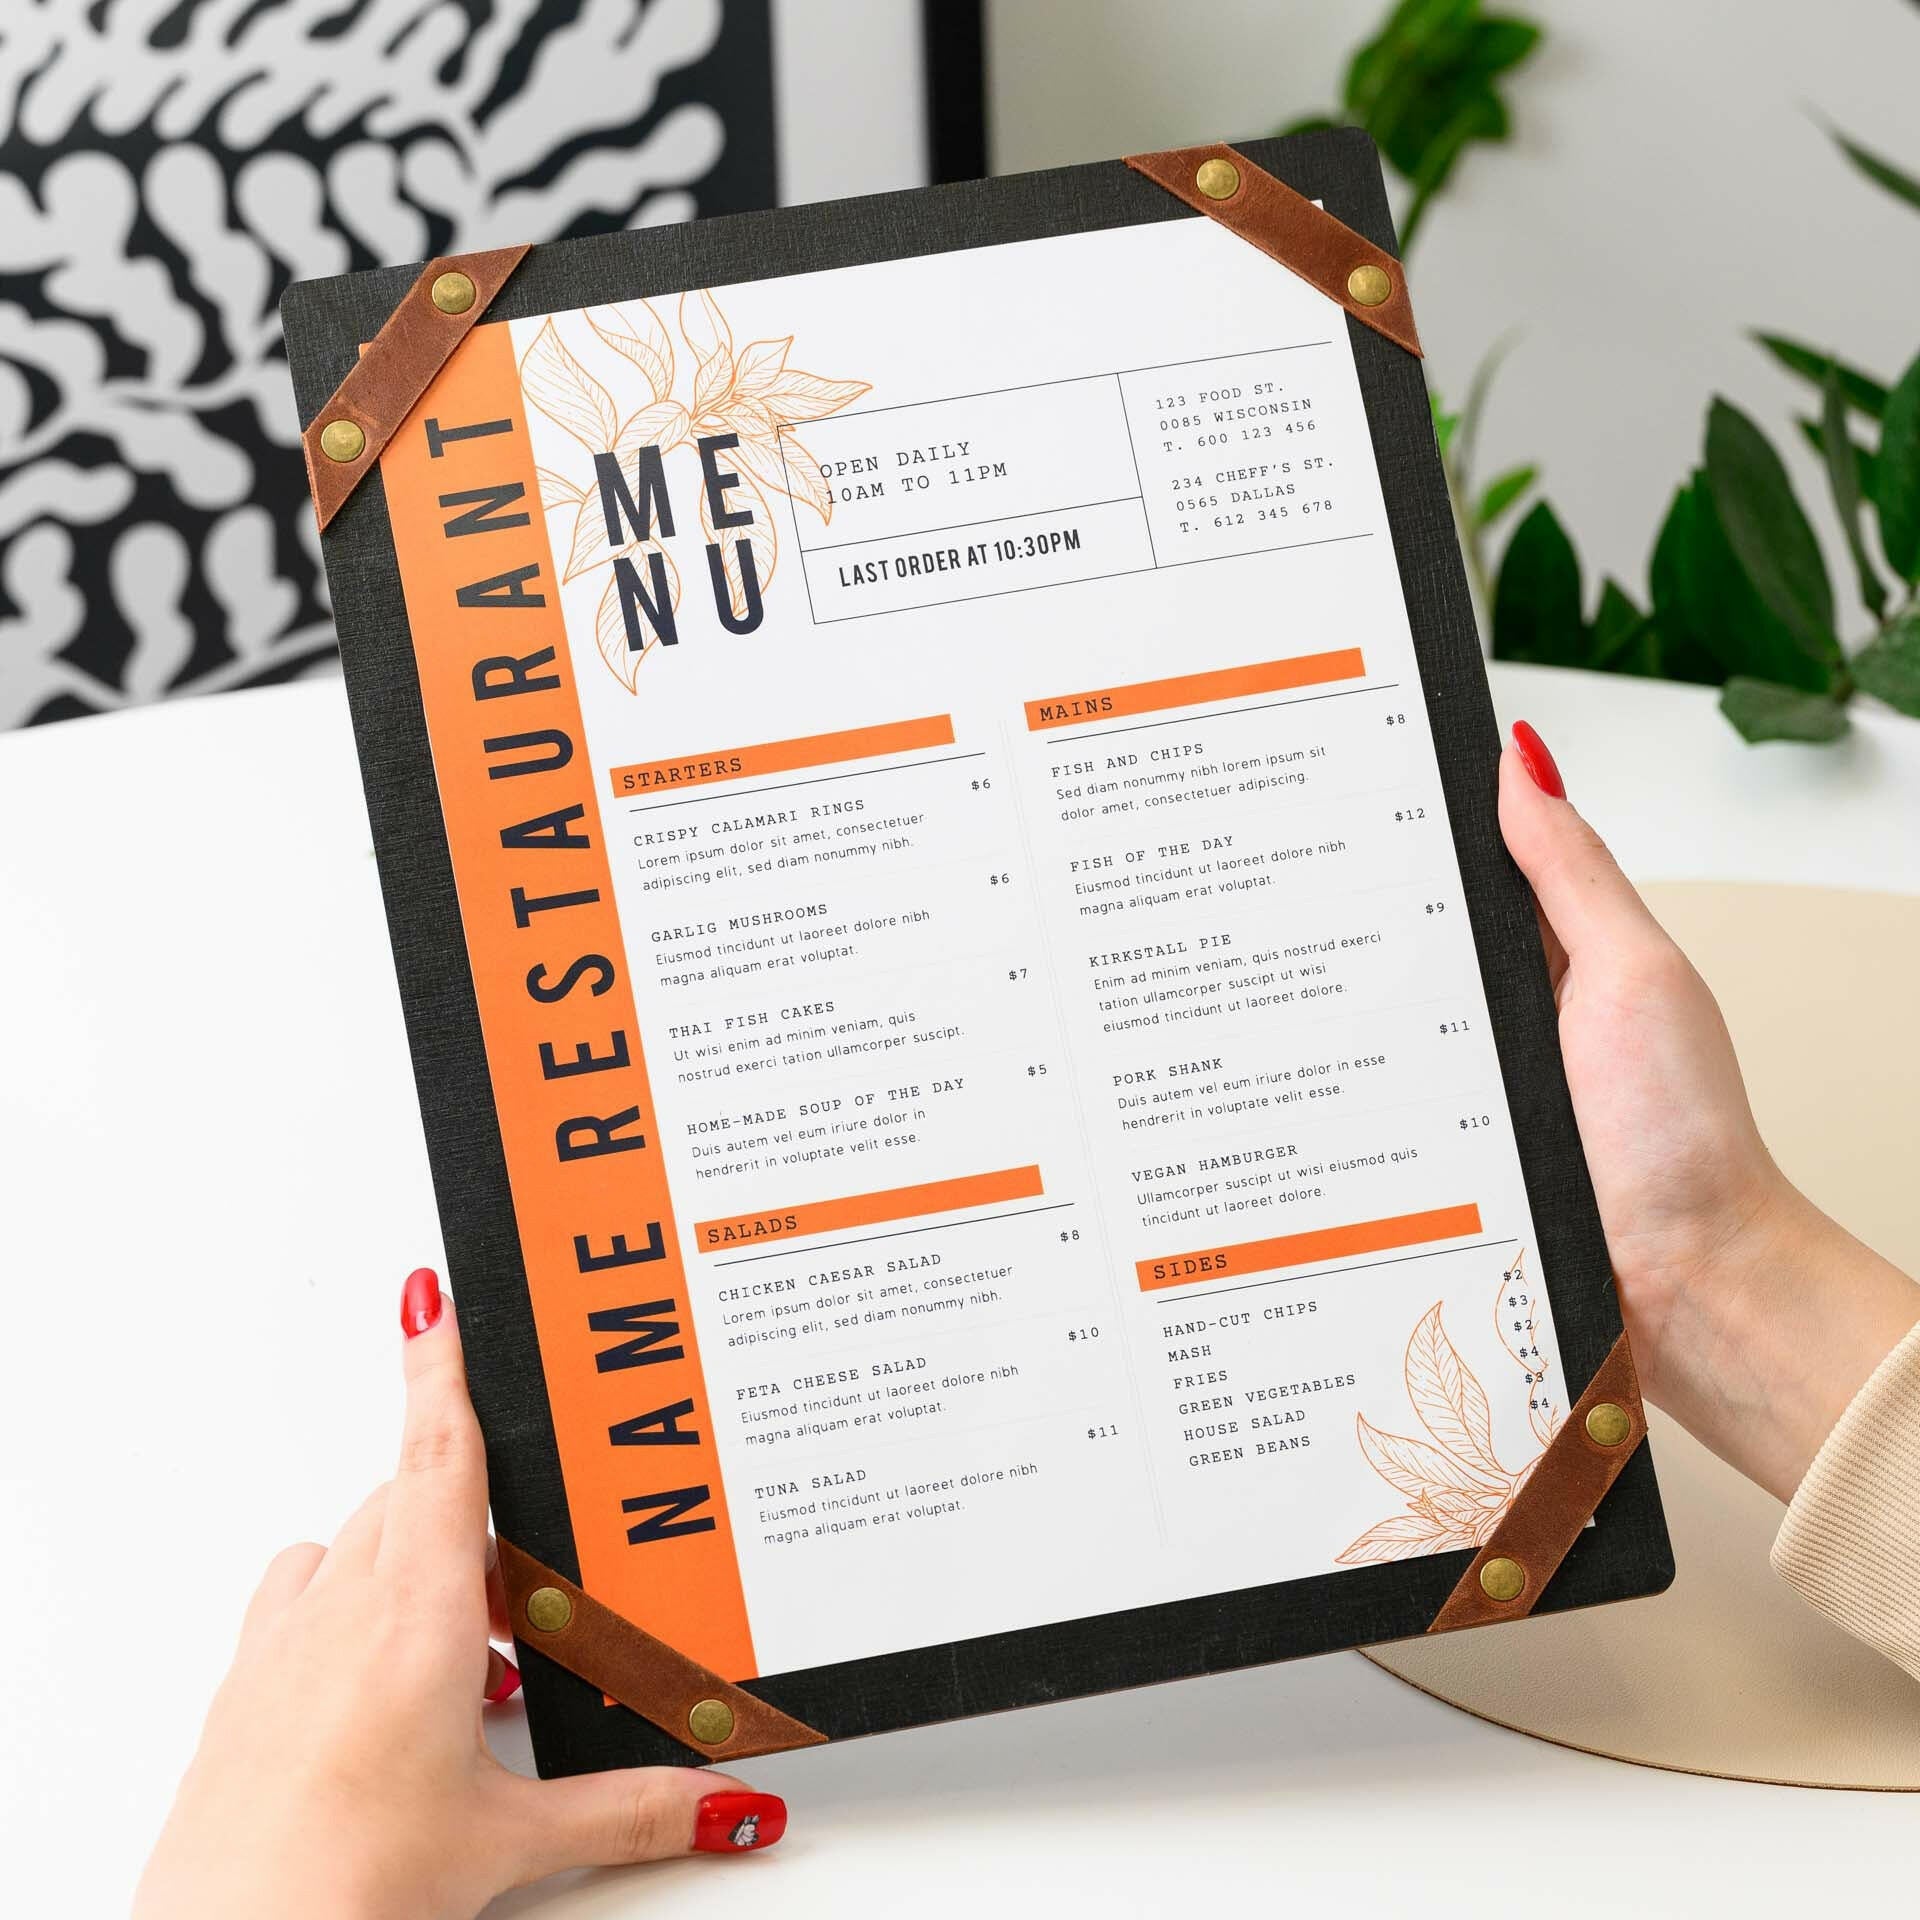 Wooden Menu Board: Classic and durable for showcasing daily specials.